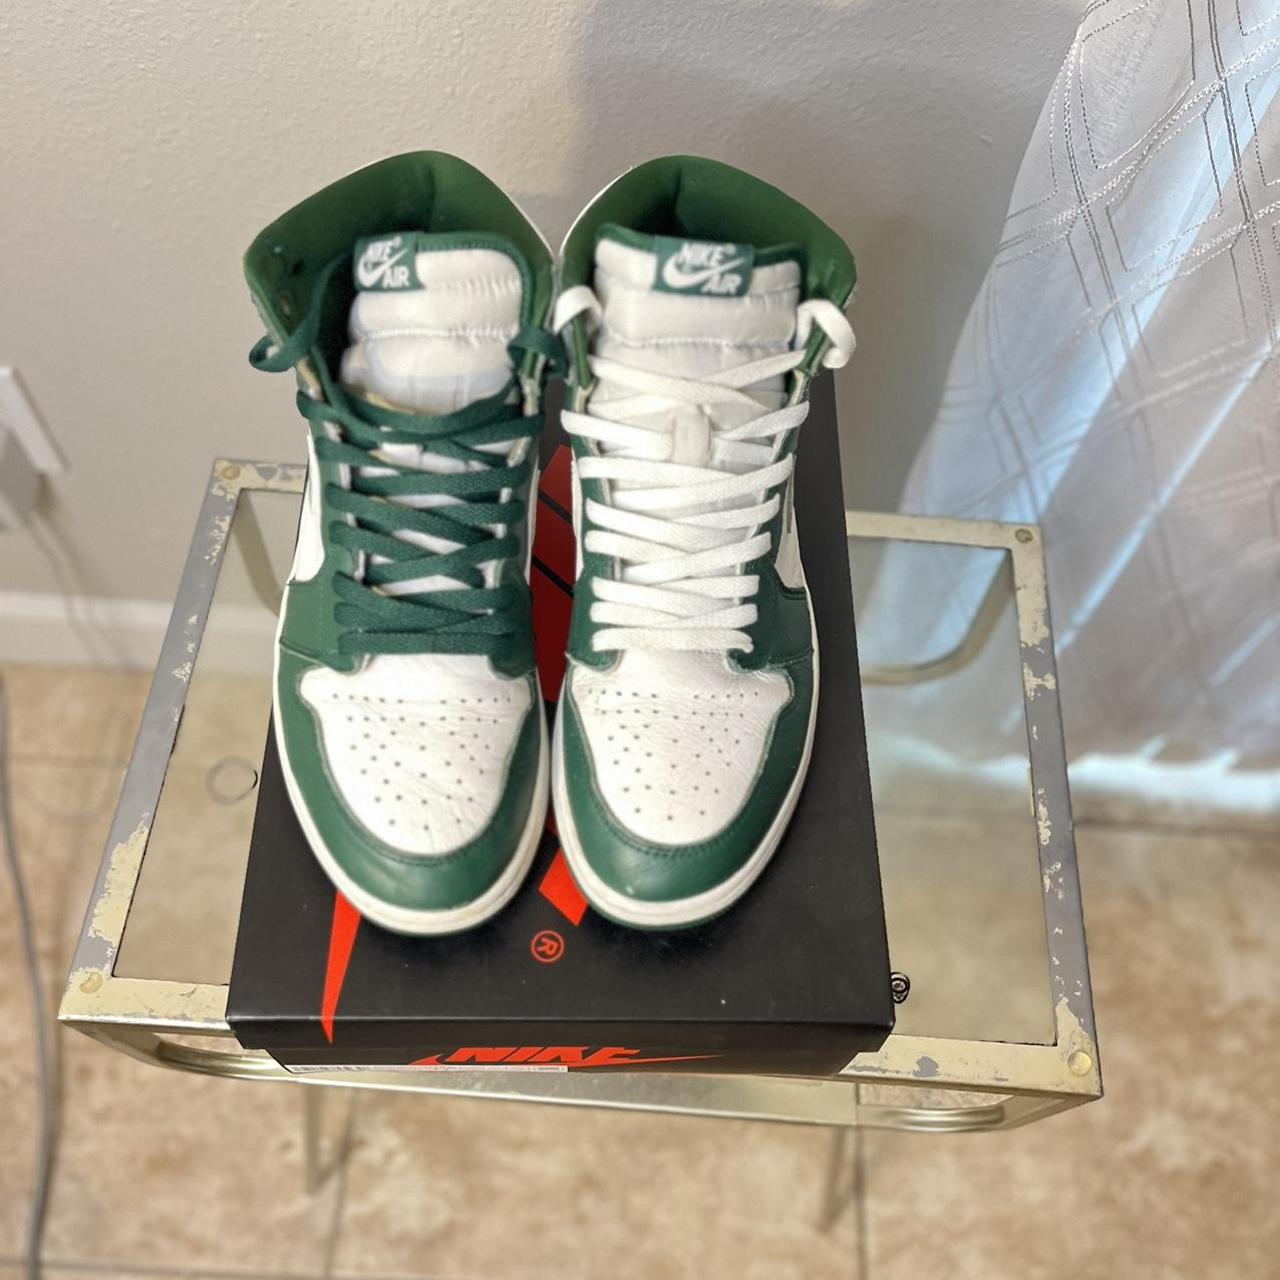 Gorge green 7/10 condition with box - Depop